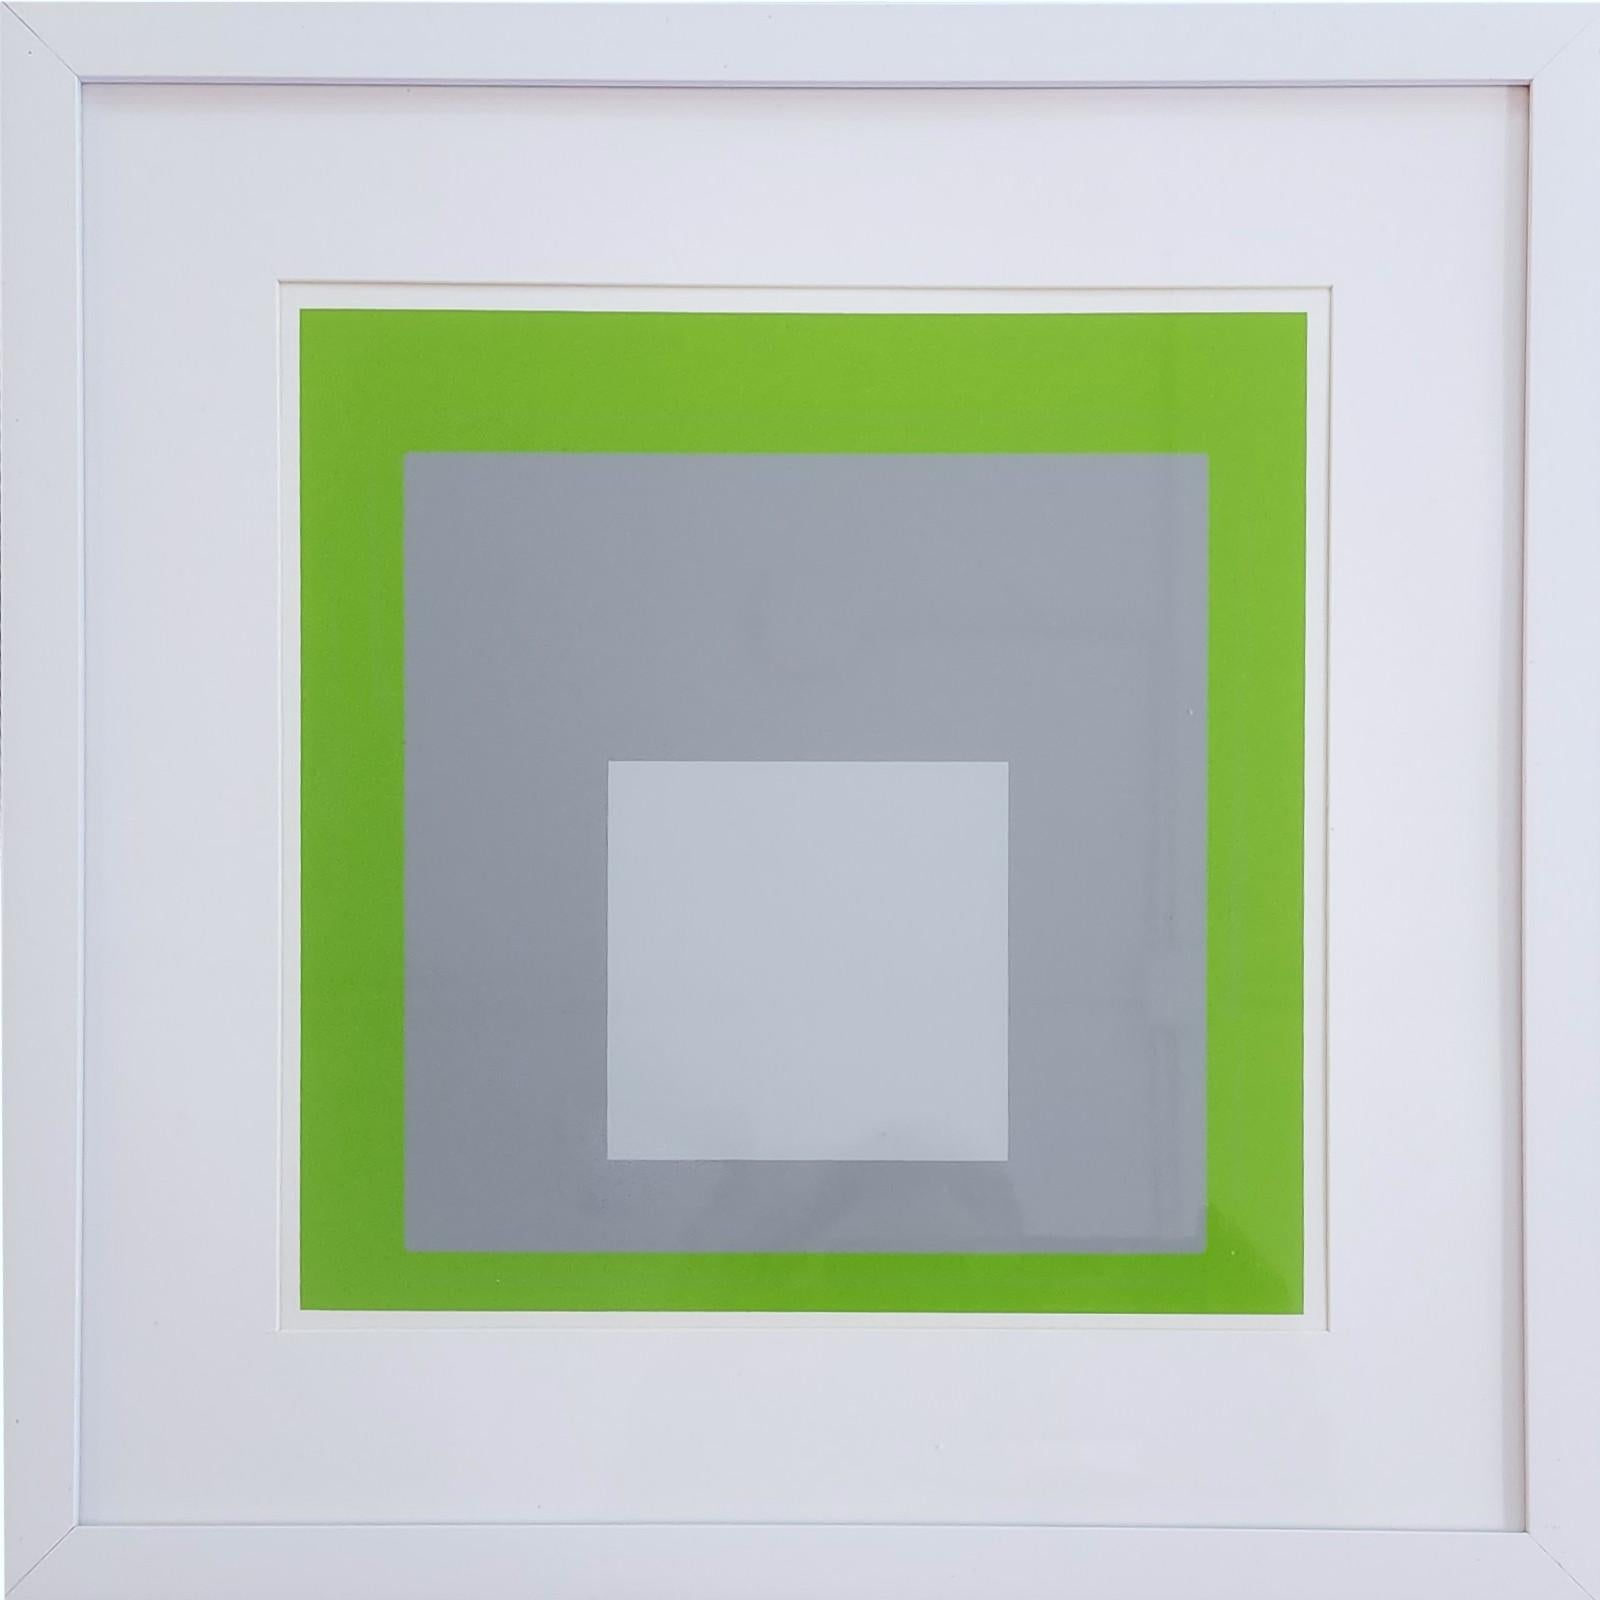 Homage to the Square: White Marker (Bauhaus, Minimalism, 50% OFF LIST PRICE) - Minimalist Print by (after) Josef Albers